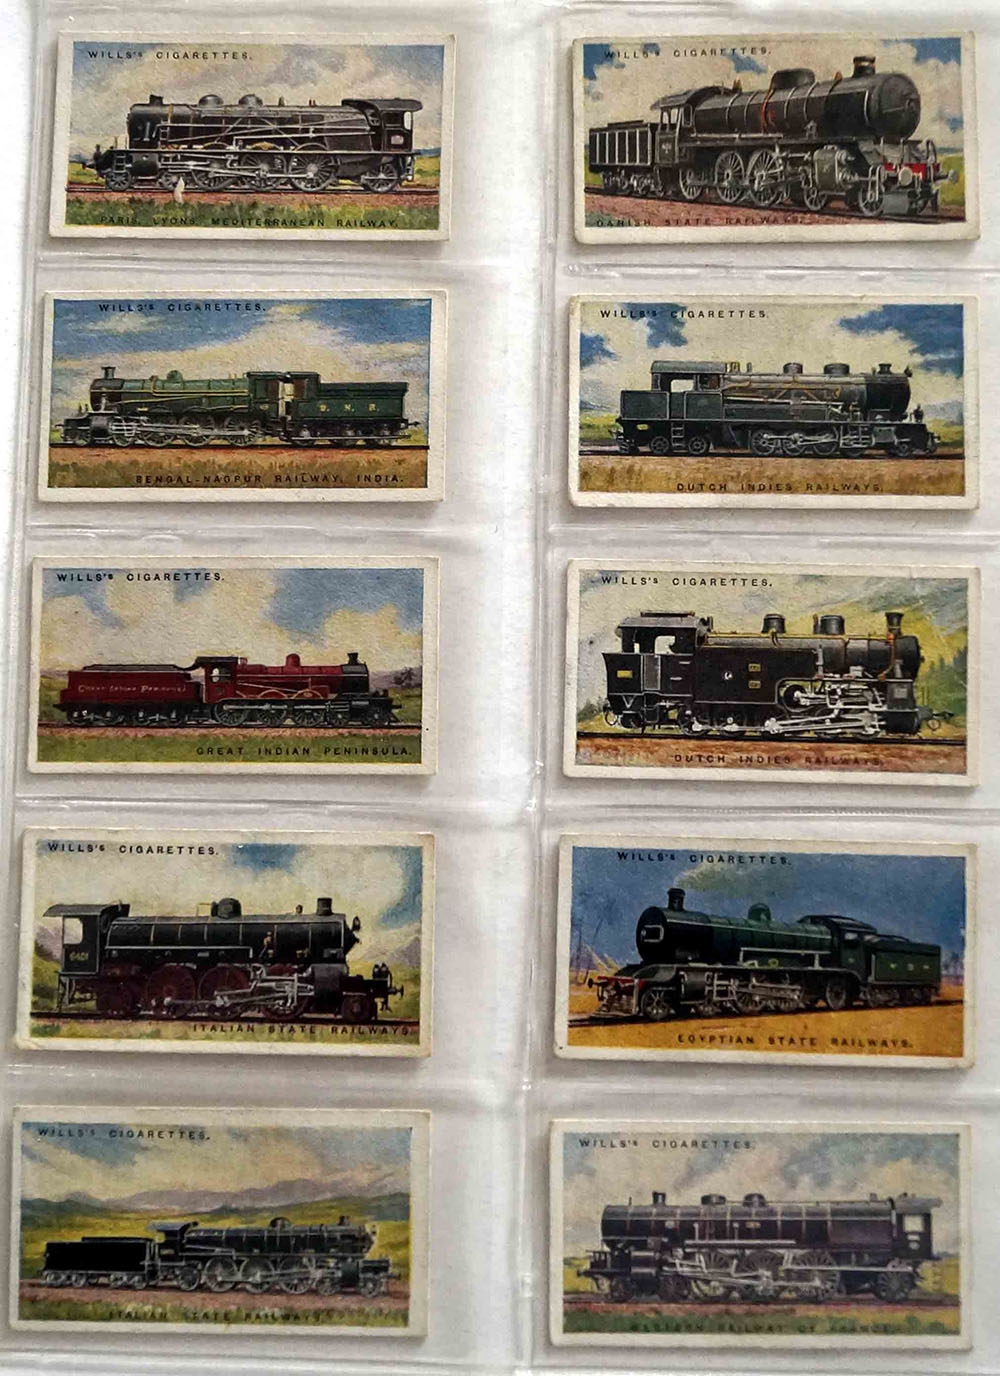 British Auto Co Famous Trains Of The World Pick Cards! 2nd Series 1952 VGC 